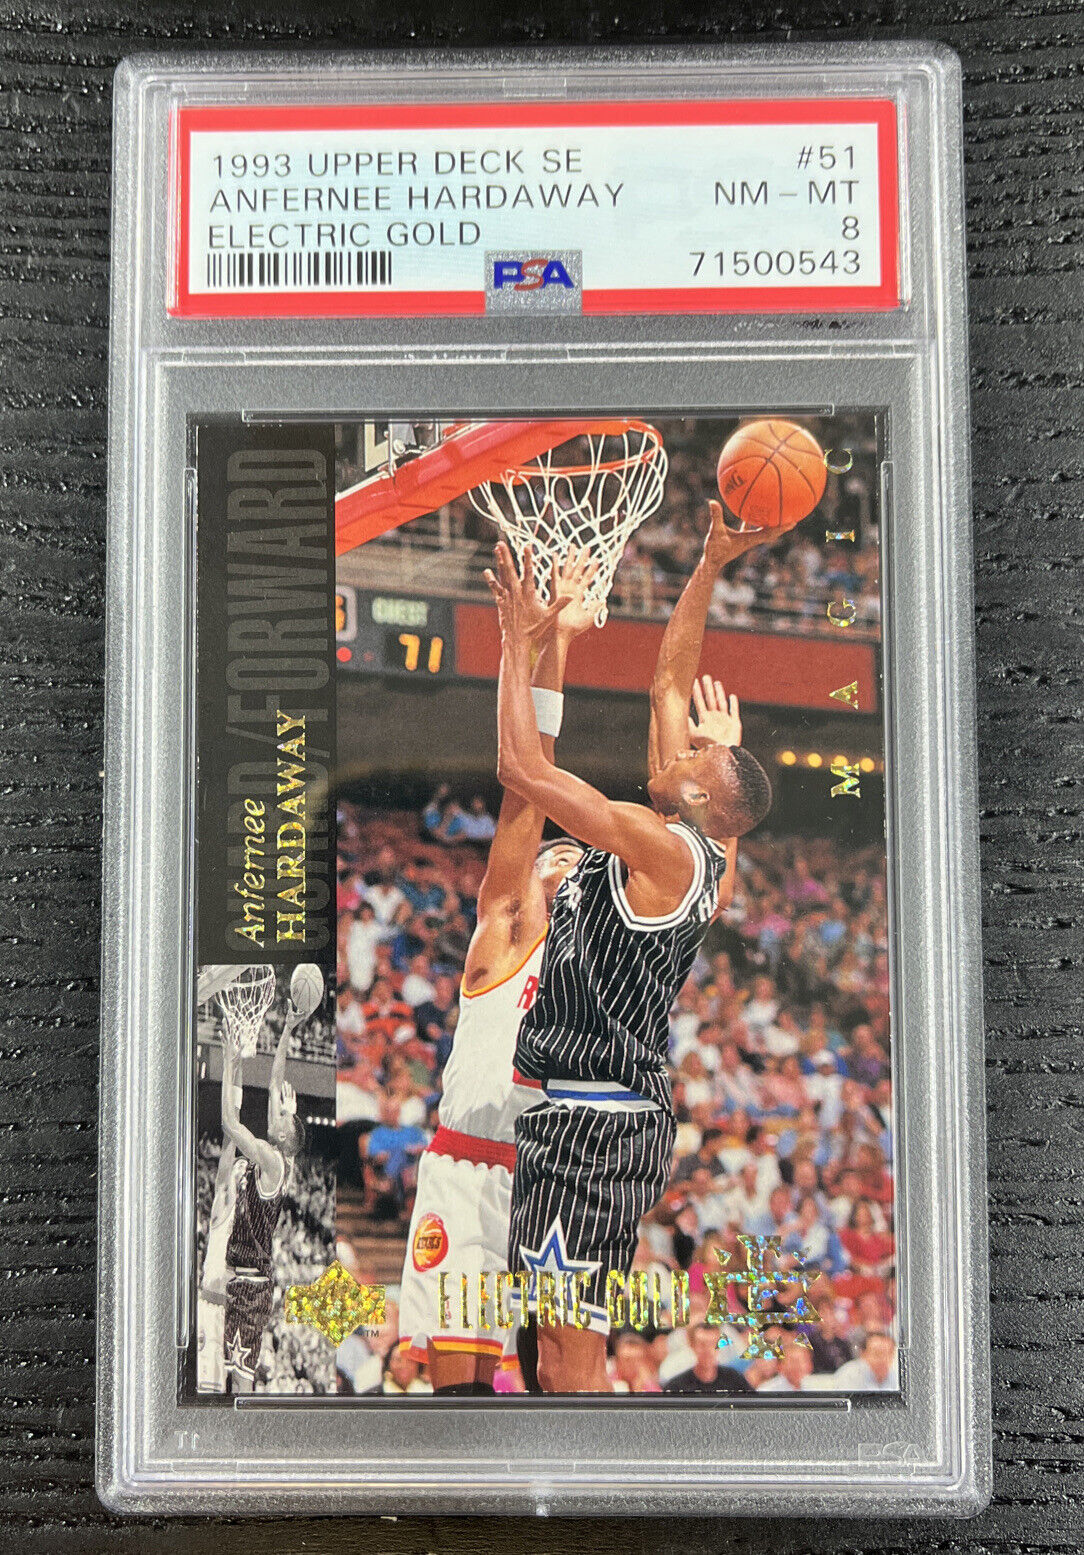 1993-94 Upper Deck SE Electric Court GOLD Anfernee (Penny) Hardaway RC #51 PSA 8